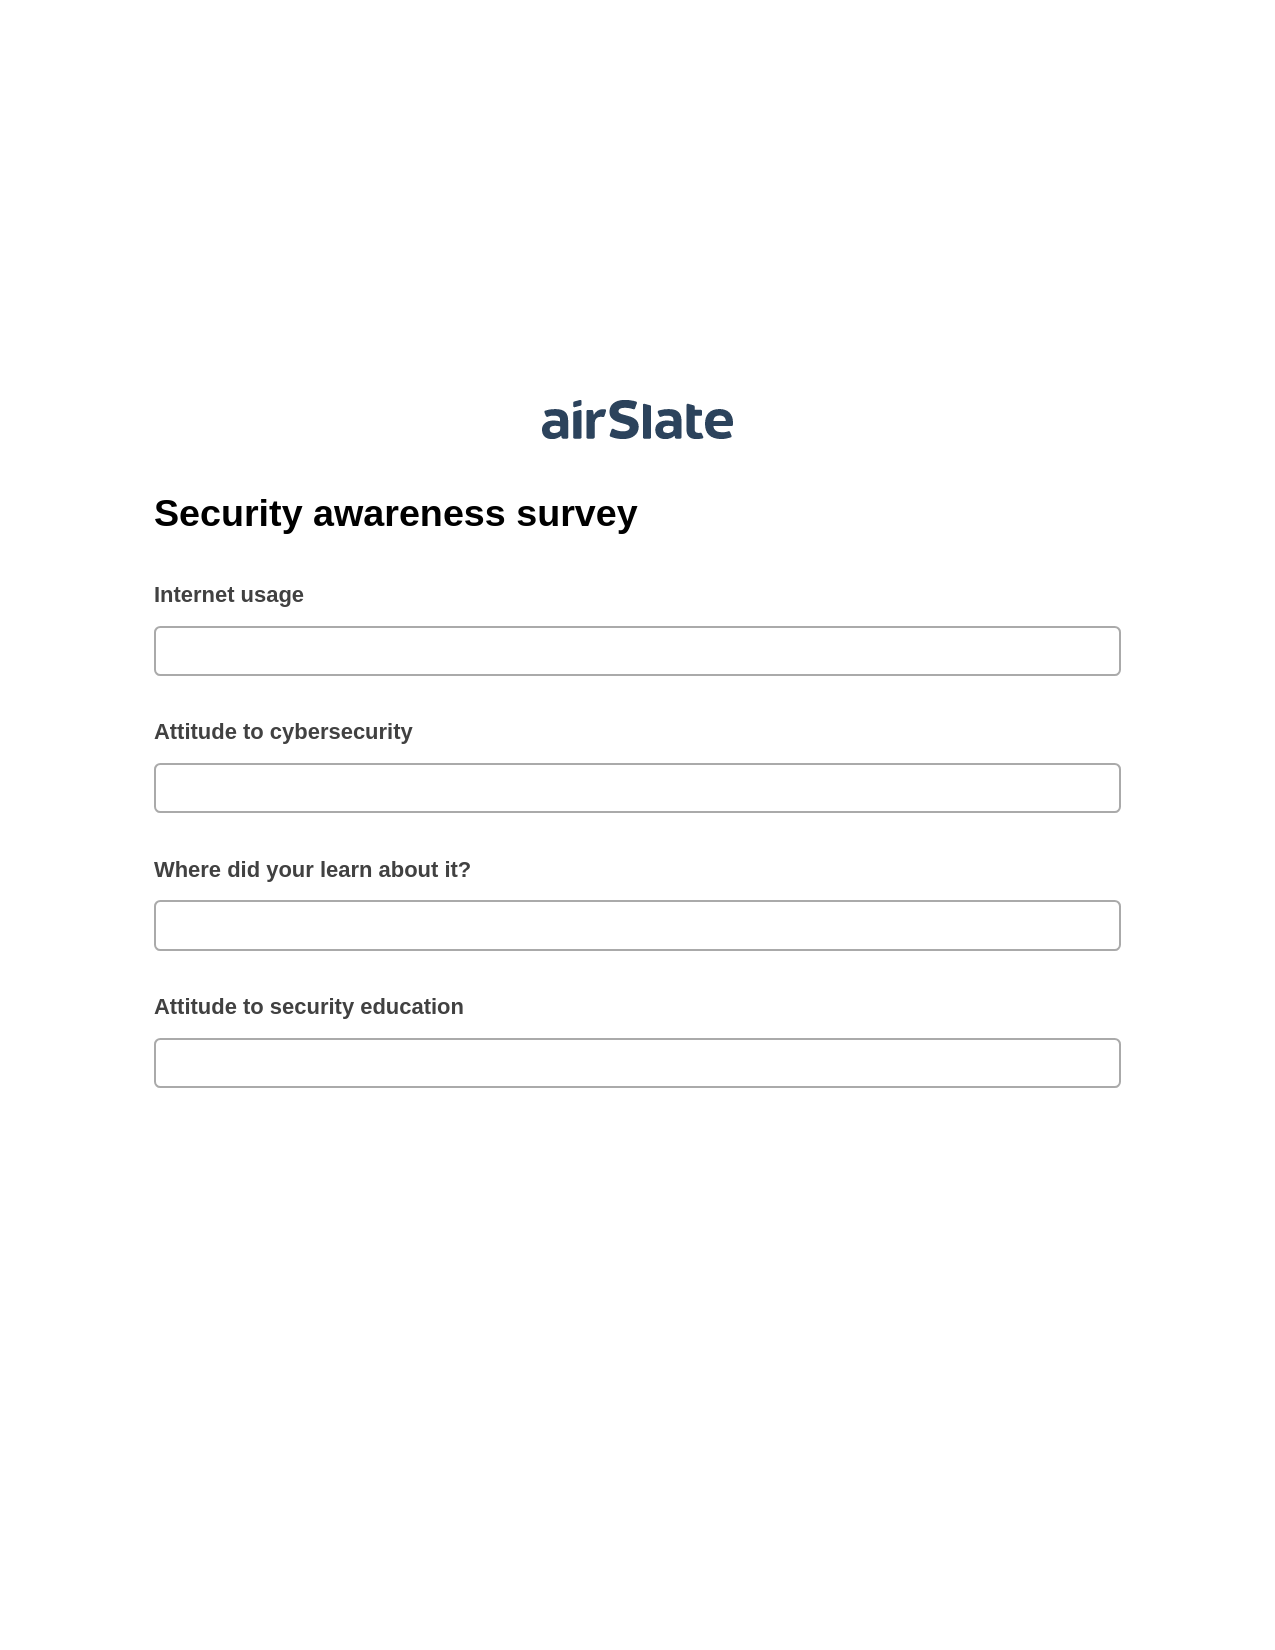 Security awareness survey Pre-fill from CSV File Dropdown Options Bot, Pre-fill with Custom Data Bot, Webhook Postfinish Bot